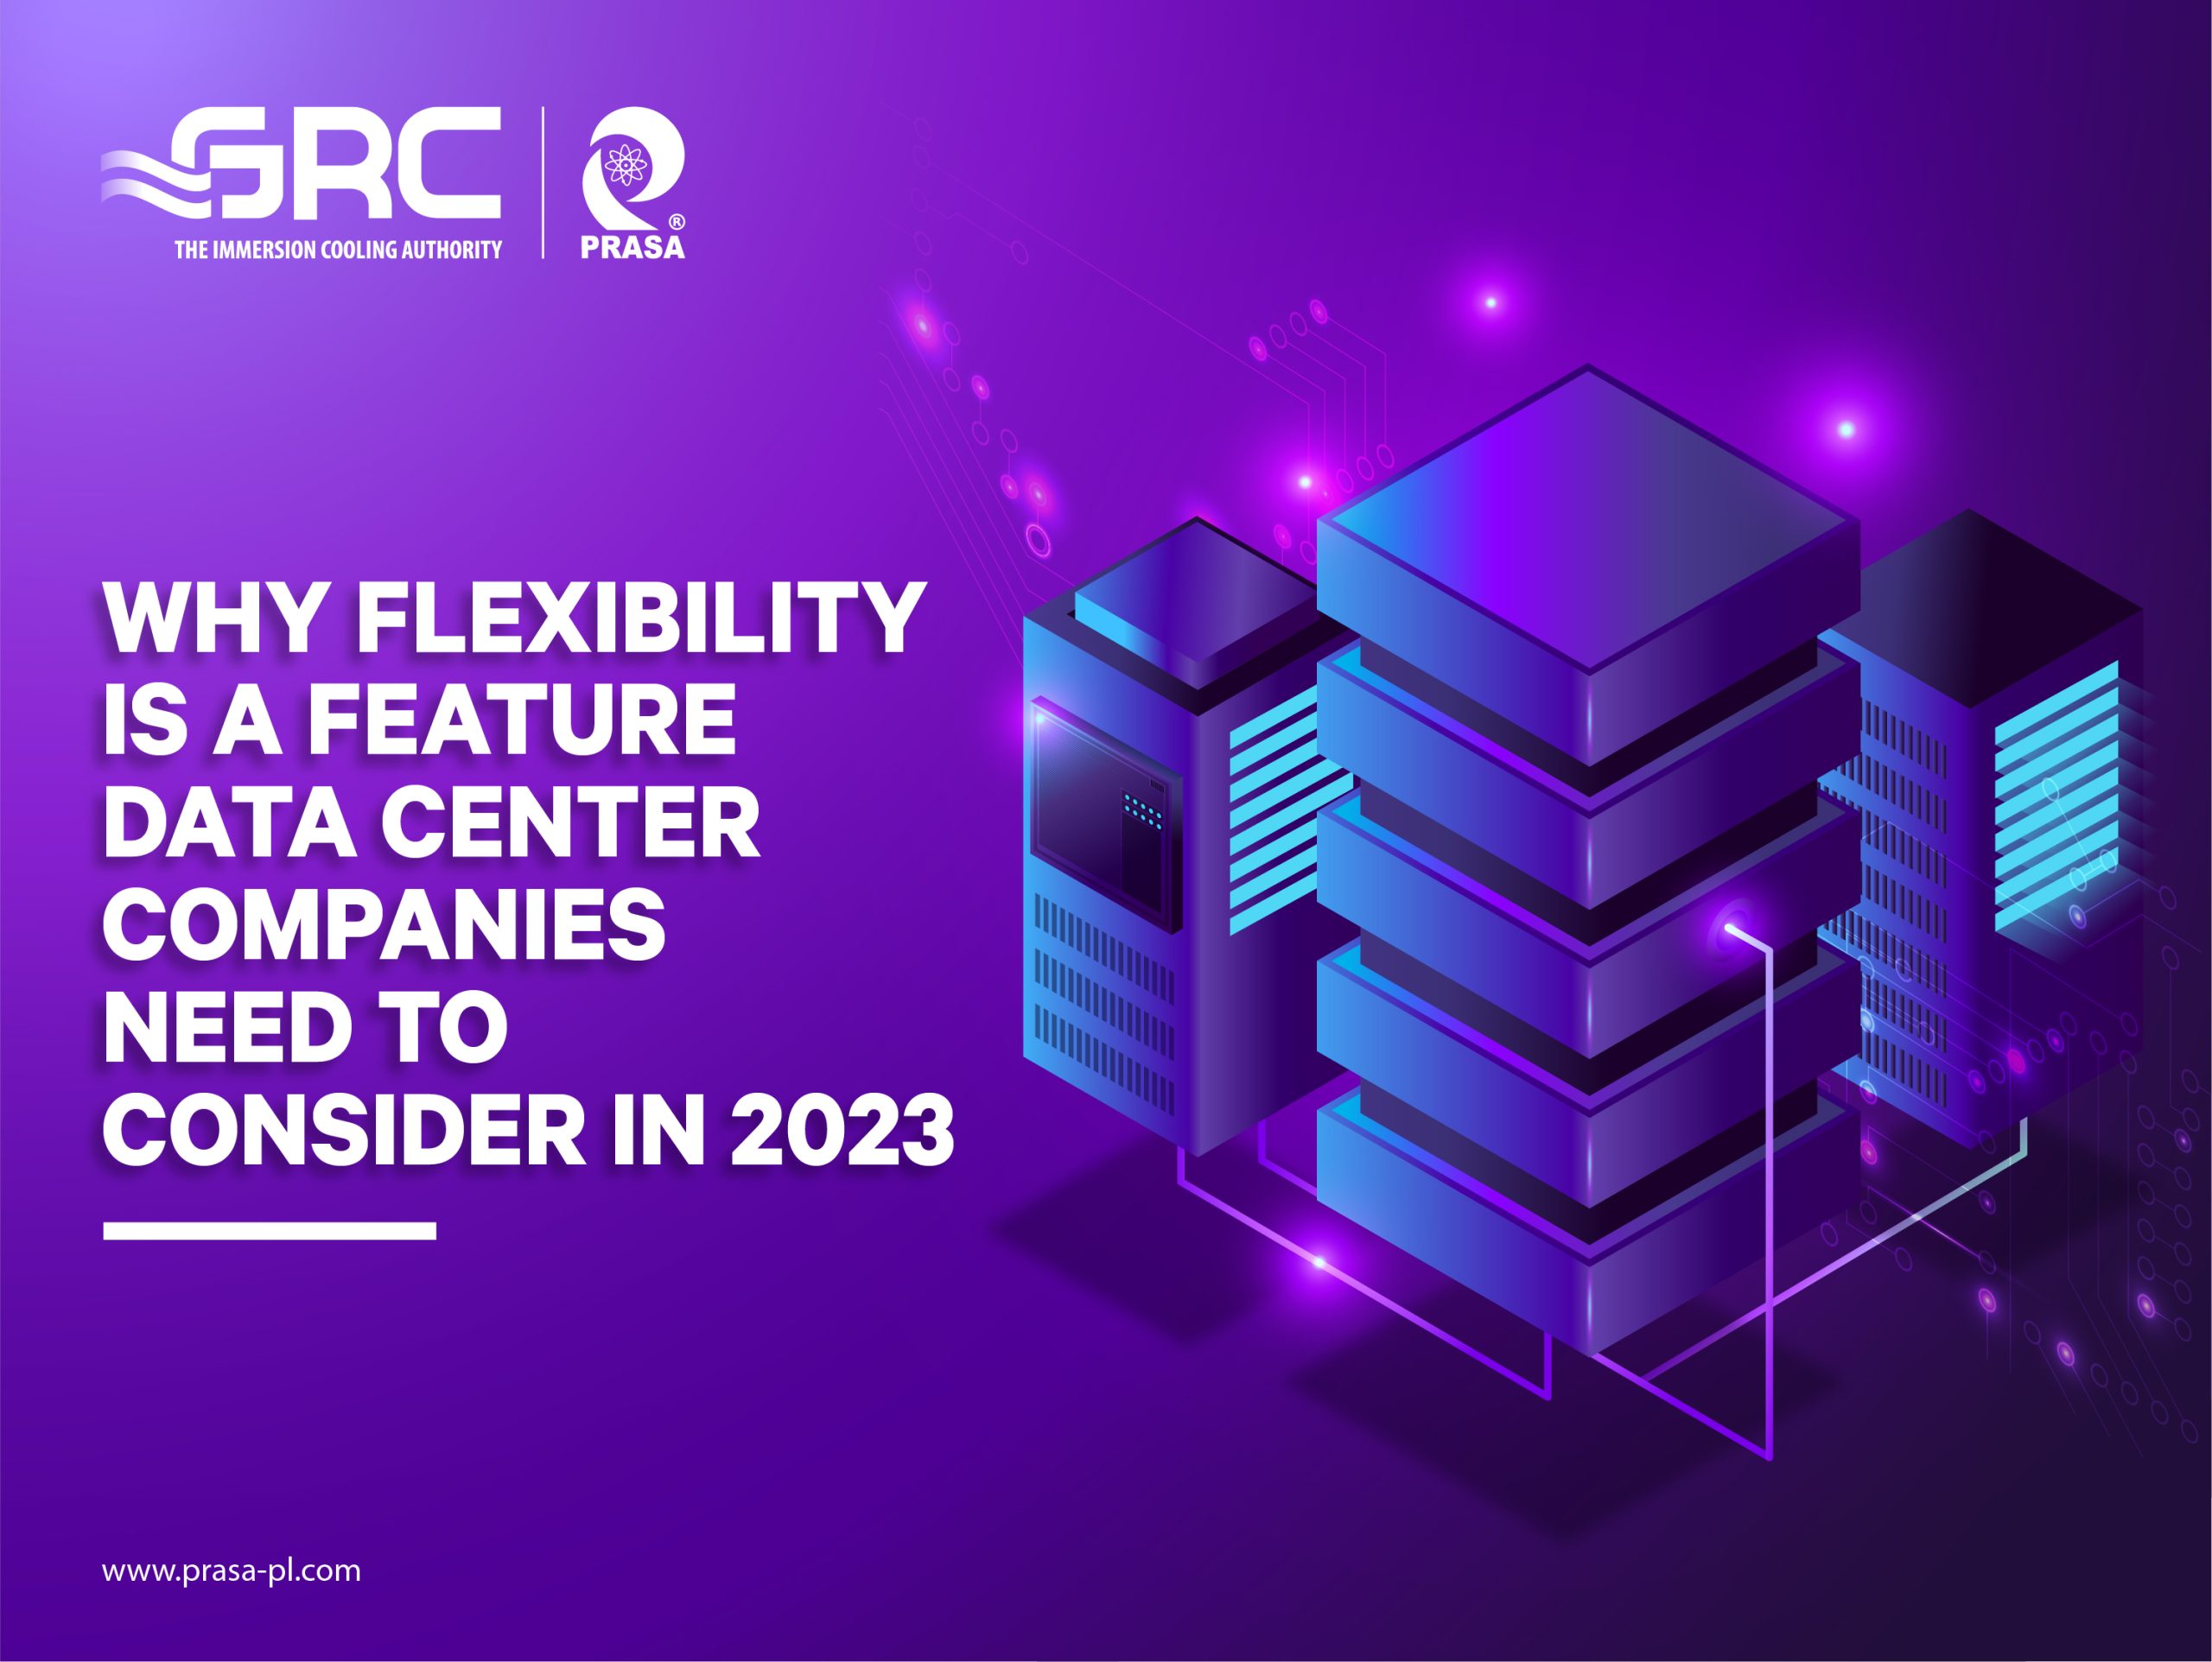 <strong>Why Flexibility is a Feature Data Center Companies Need to Consider in 2023</strong>